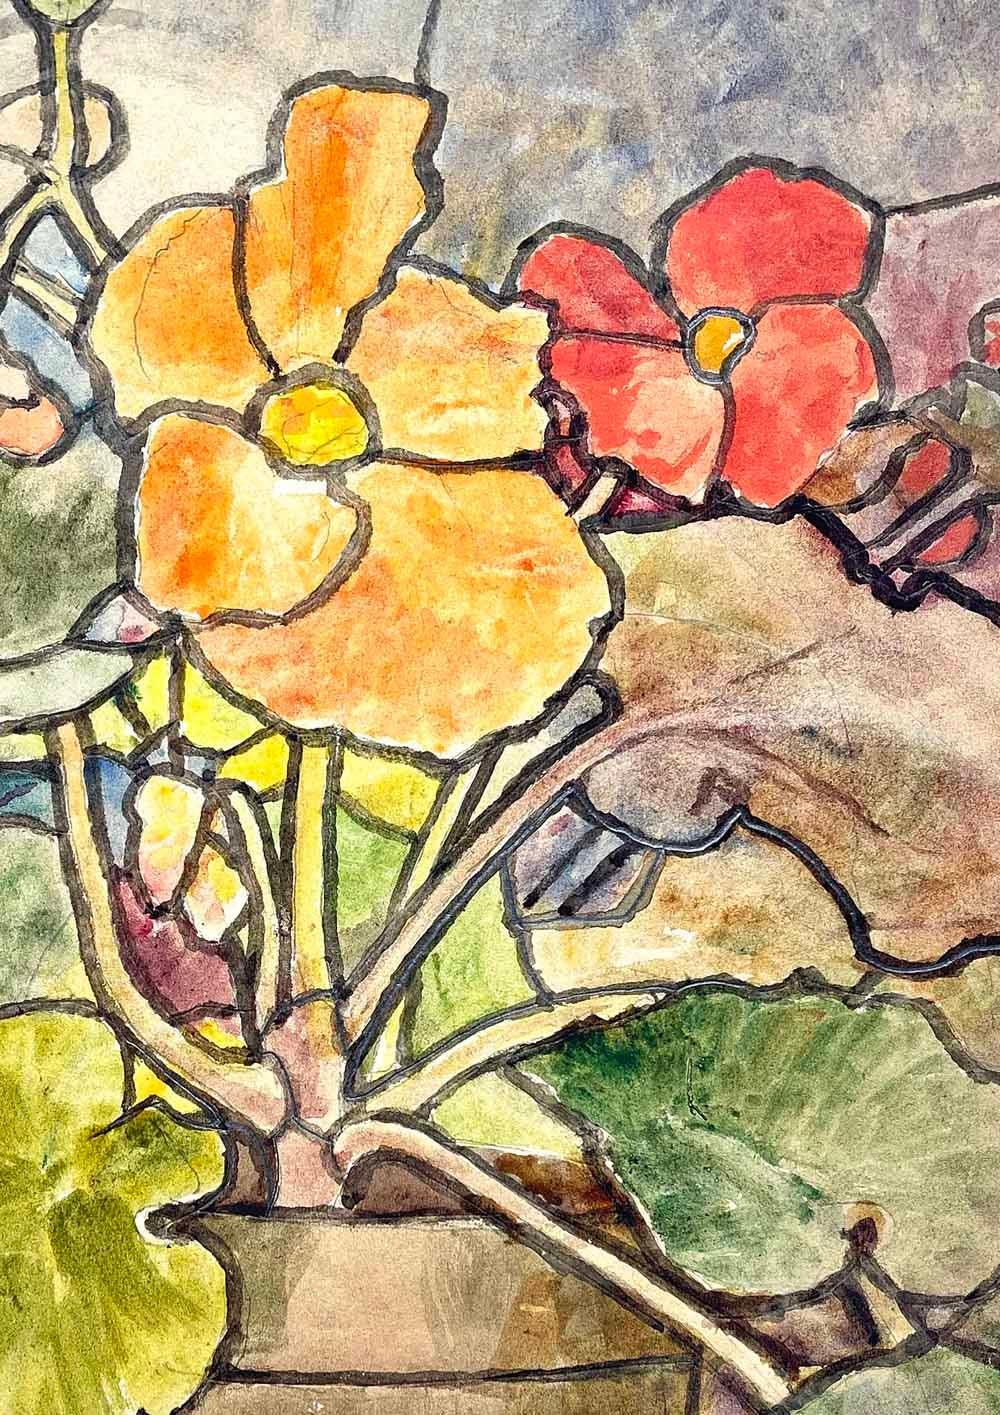 Beautifully painted in vivid tones of yellow-orange, mossy green, warm red and deep blue -- echoing the rich tones of the stained glass he employed -- this rare and gorgeous watercolor by Louis Comfort Tiffany was clearly painted to inspire and